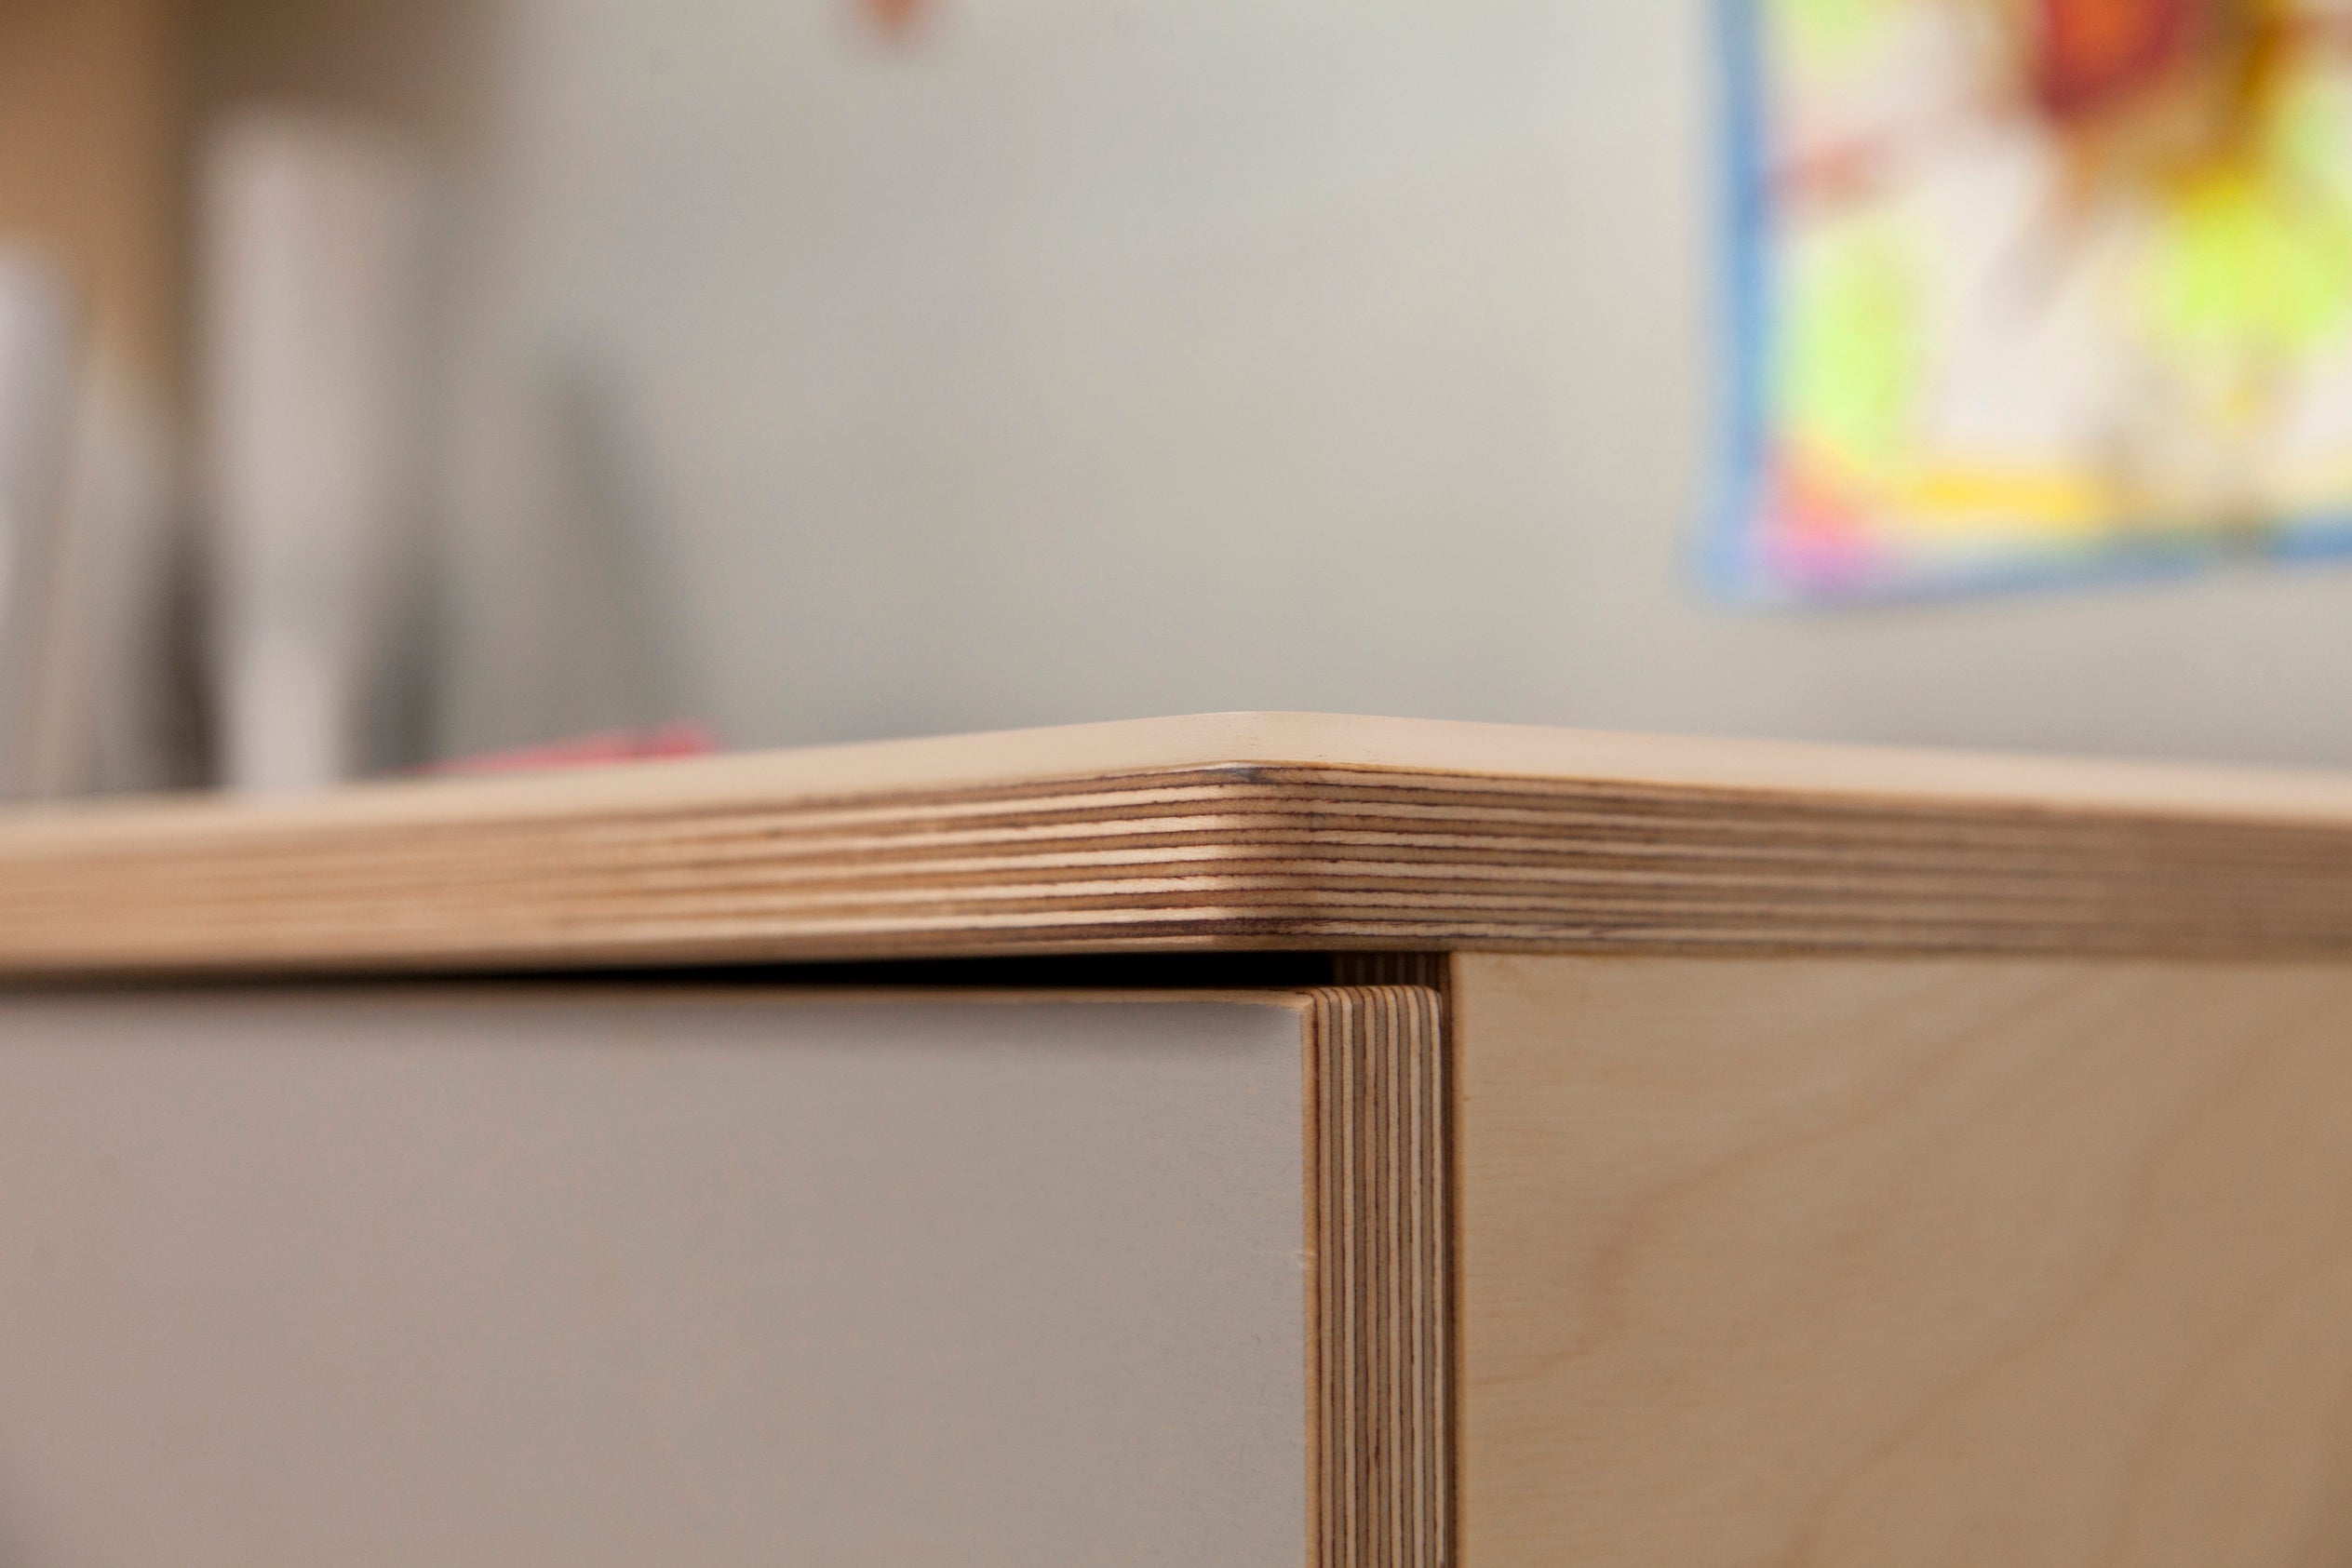 Close-up of a wooden table corner showing precise craftsmanship and layers of material.